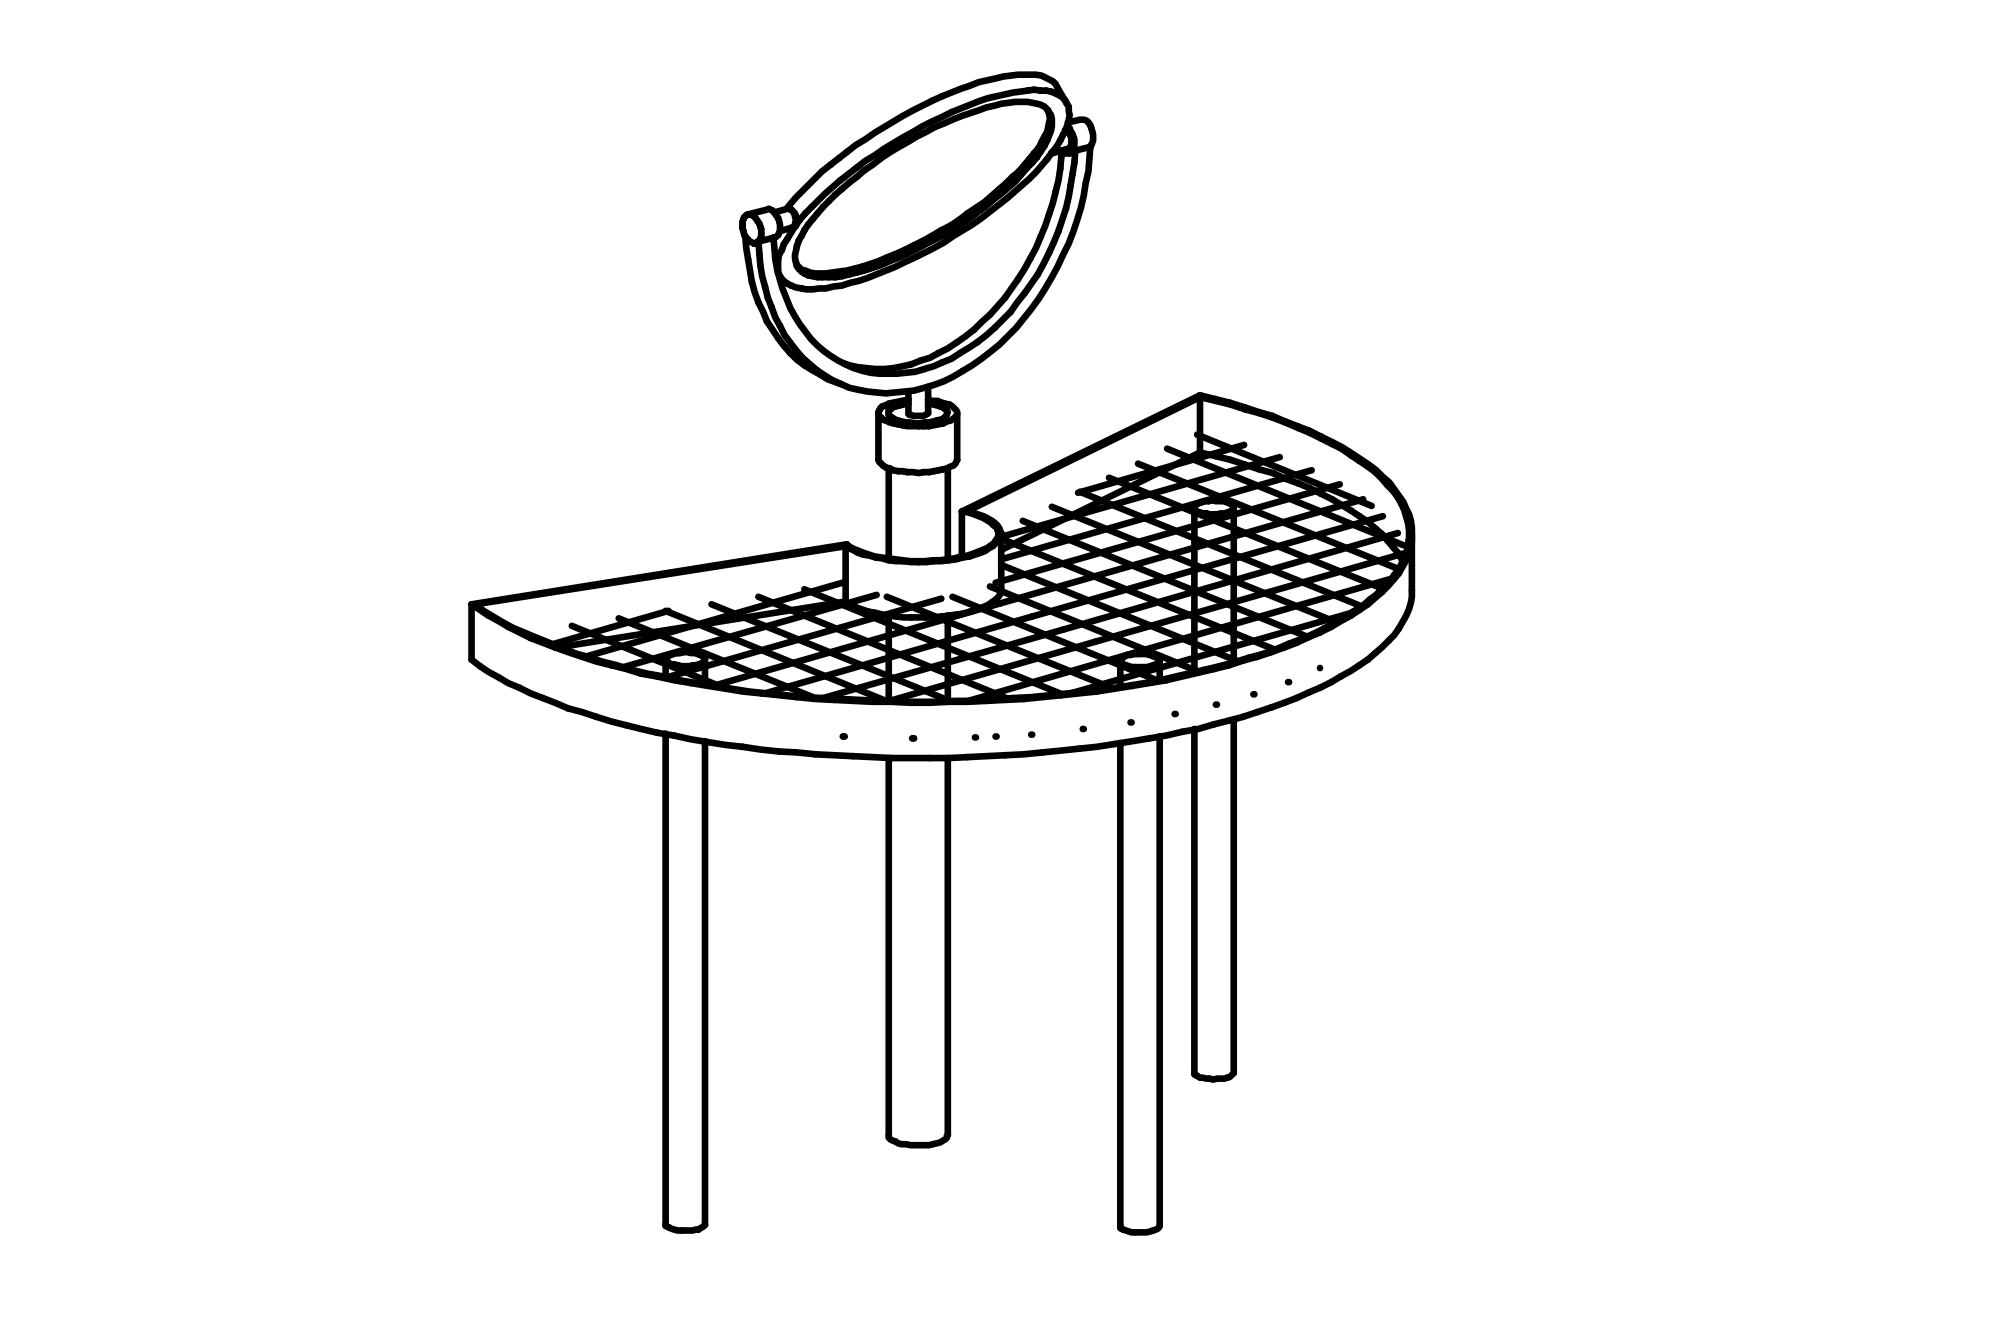 Magnifying Lens with Table with shatter-proof acrylic glass